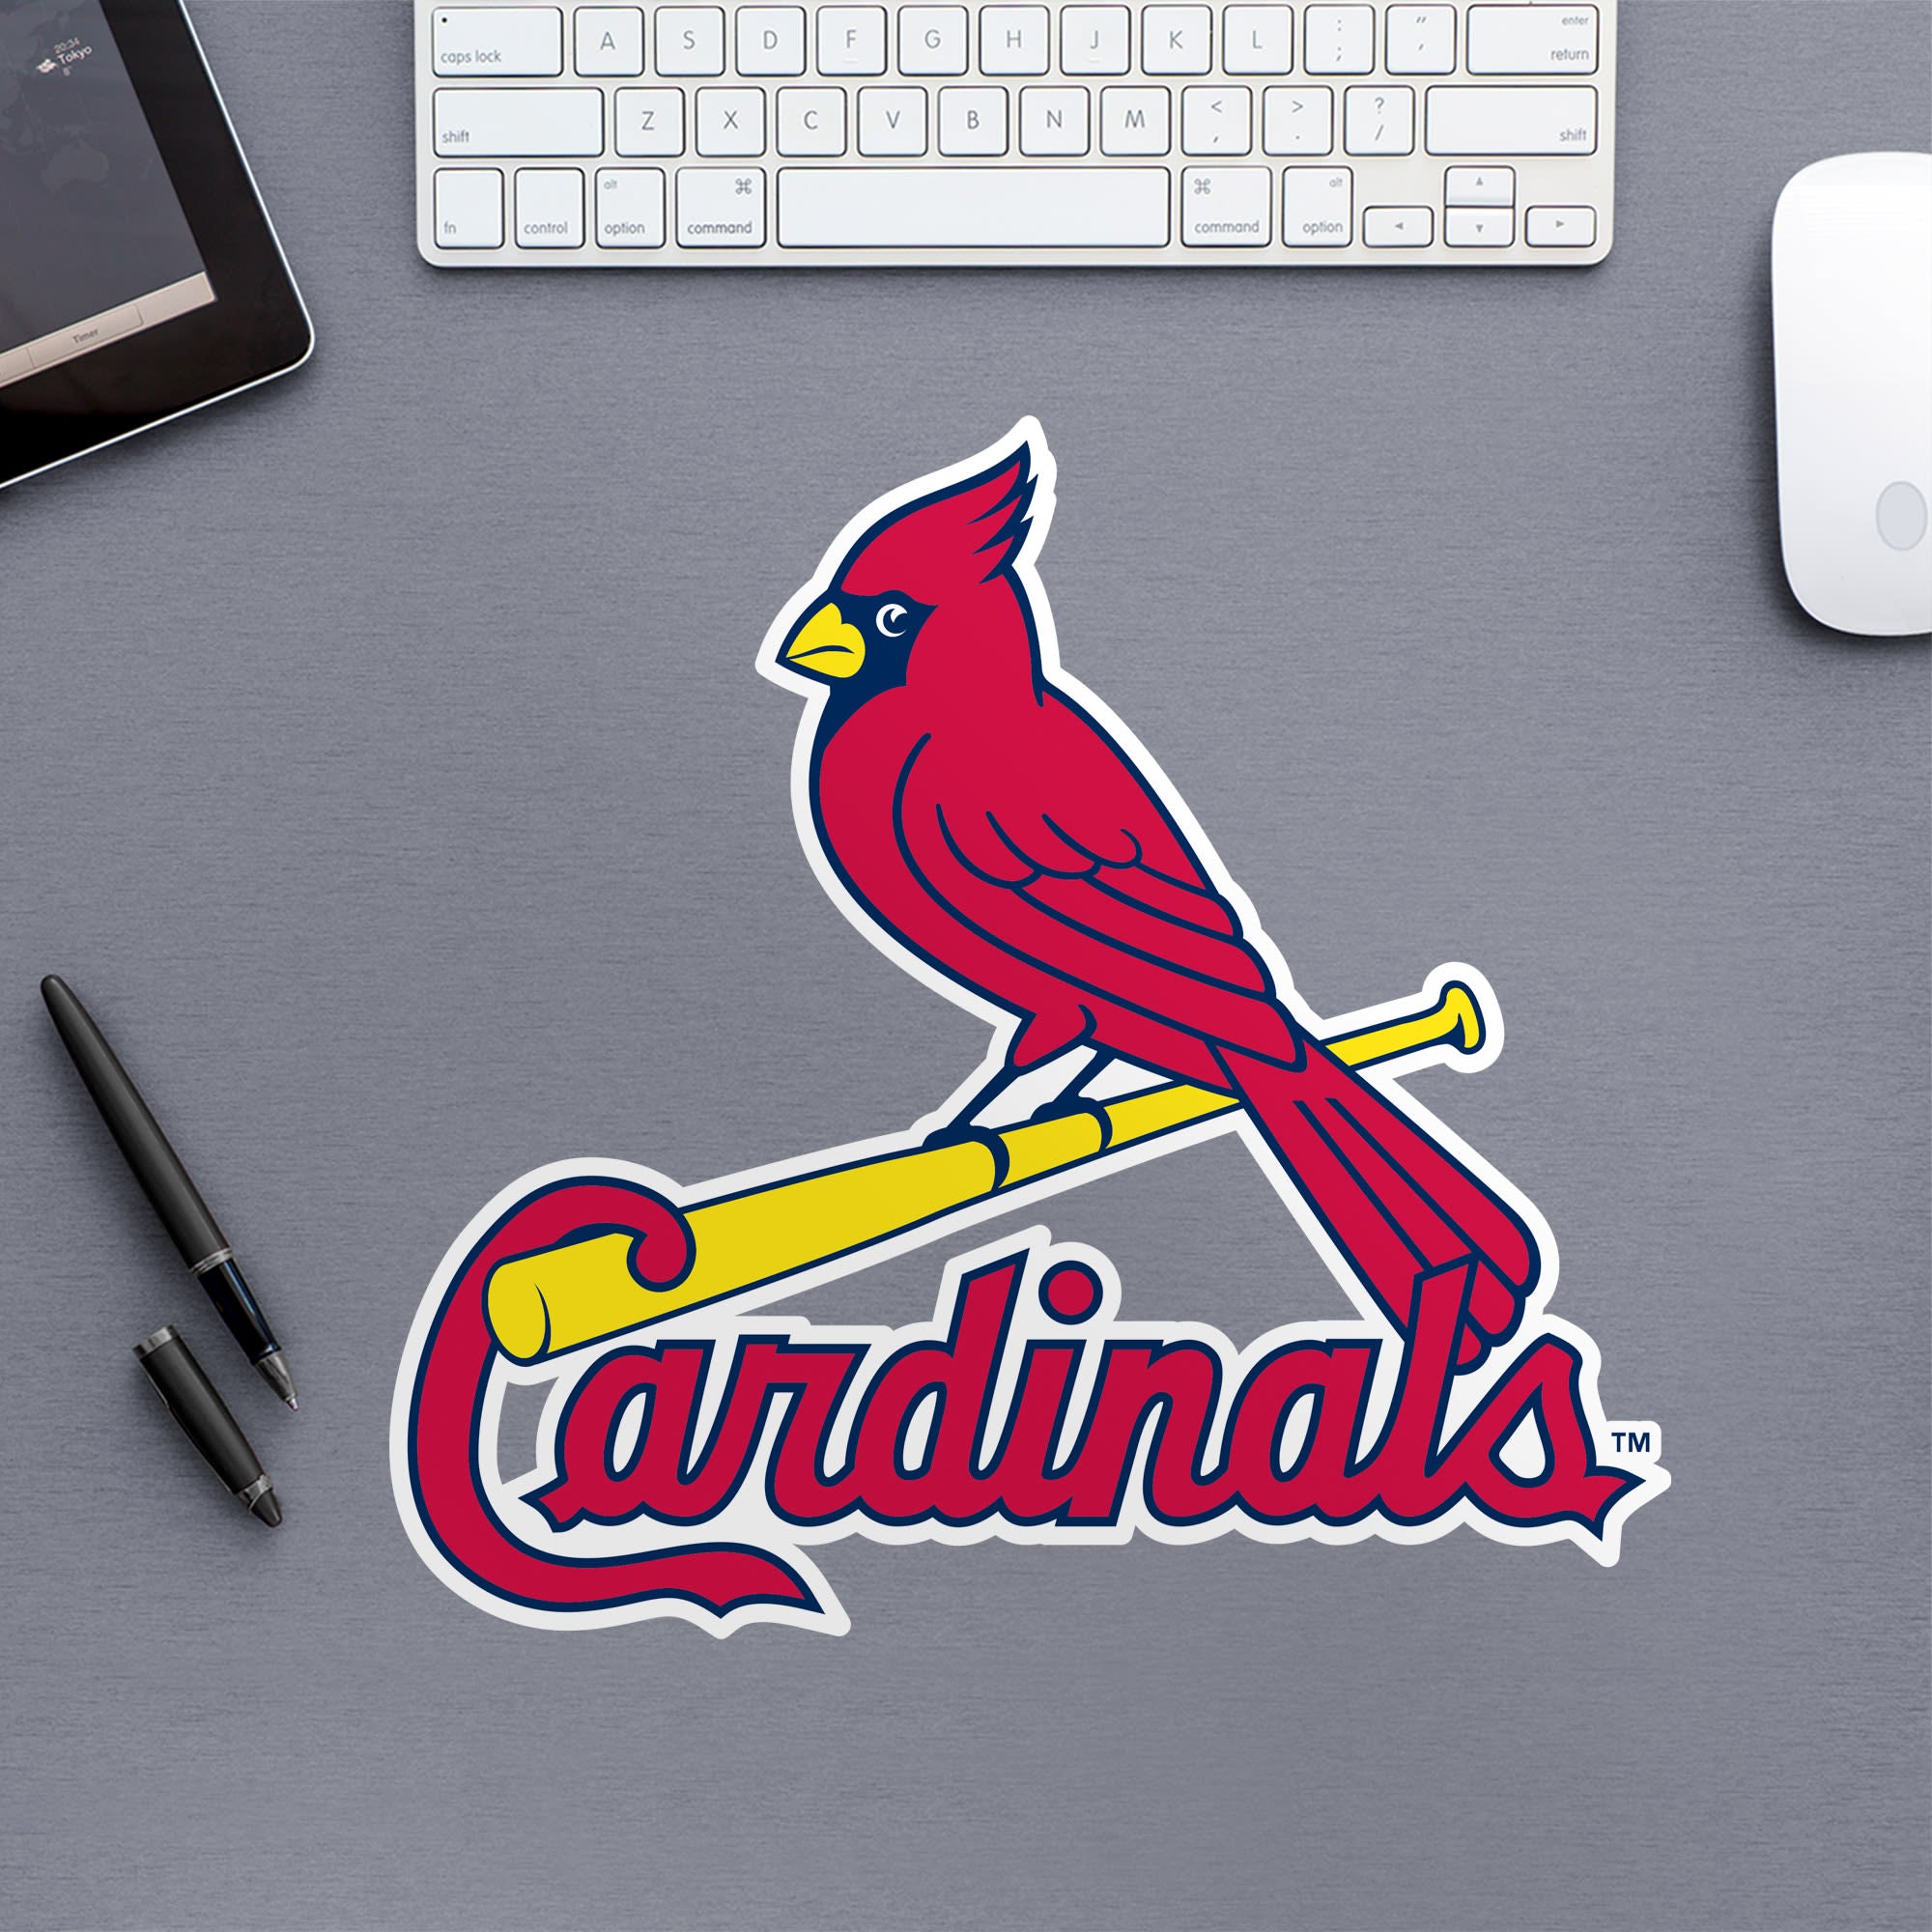 St. Louis Cardinals: Logo - Officially Licensed MLB Removable Wall Decal Large by Fathead | Vinyl